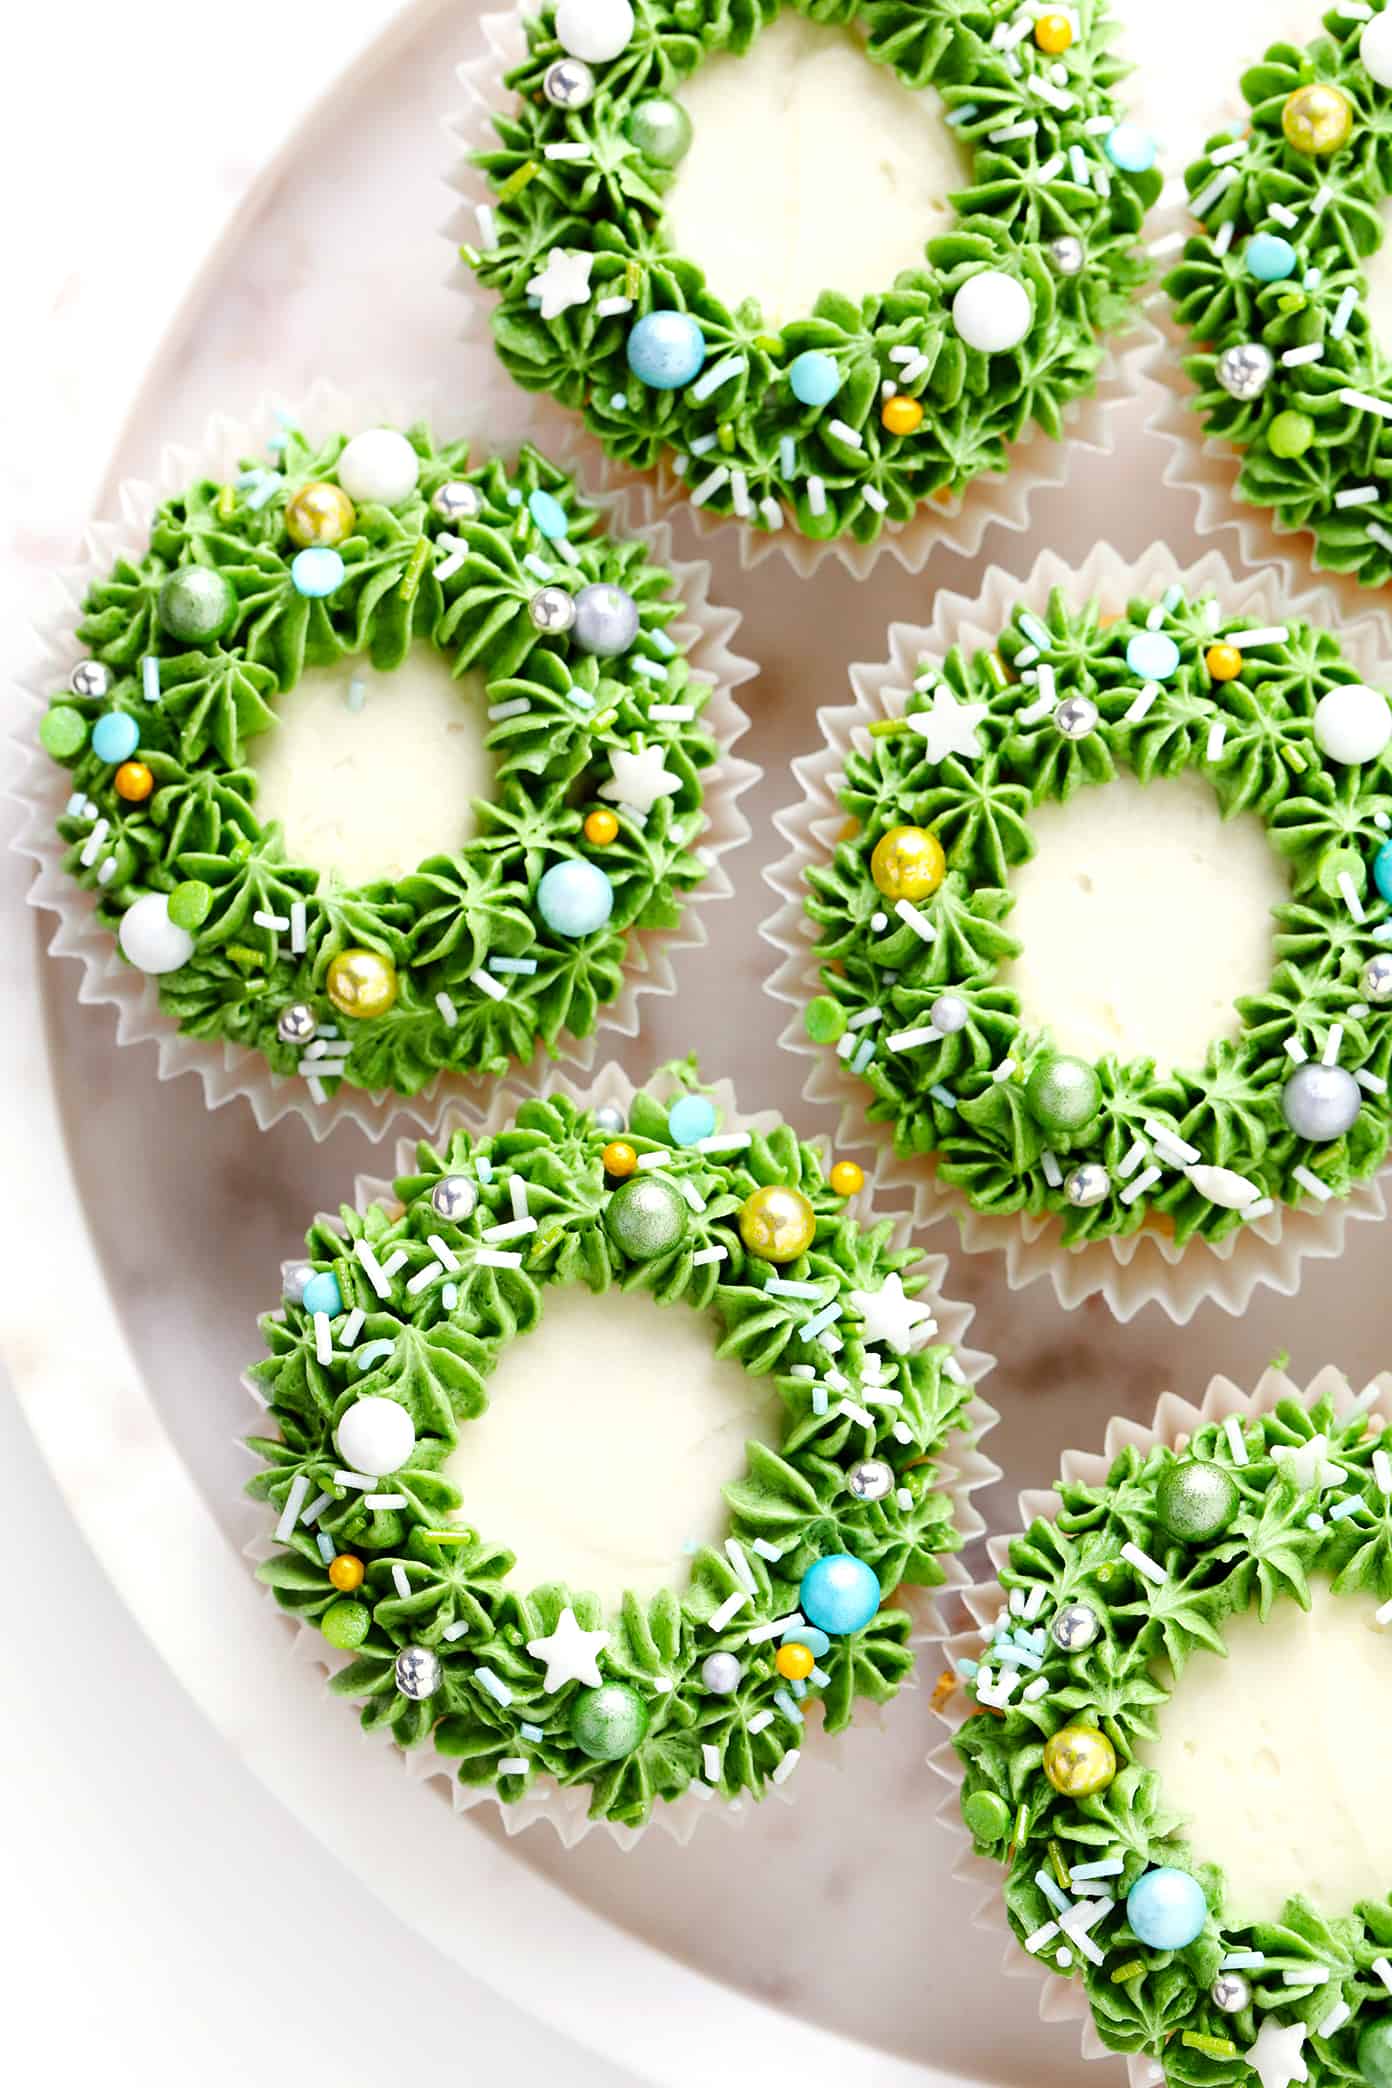 Christmas Wreath Cupcakes with Sprinkles on Plate